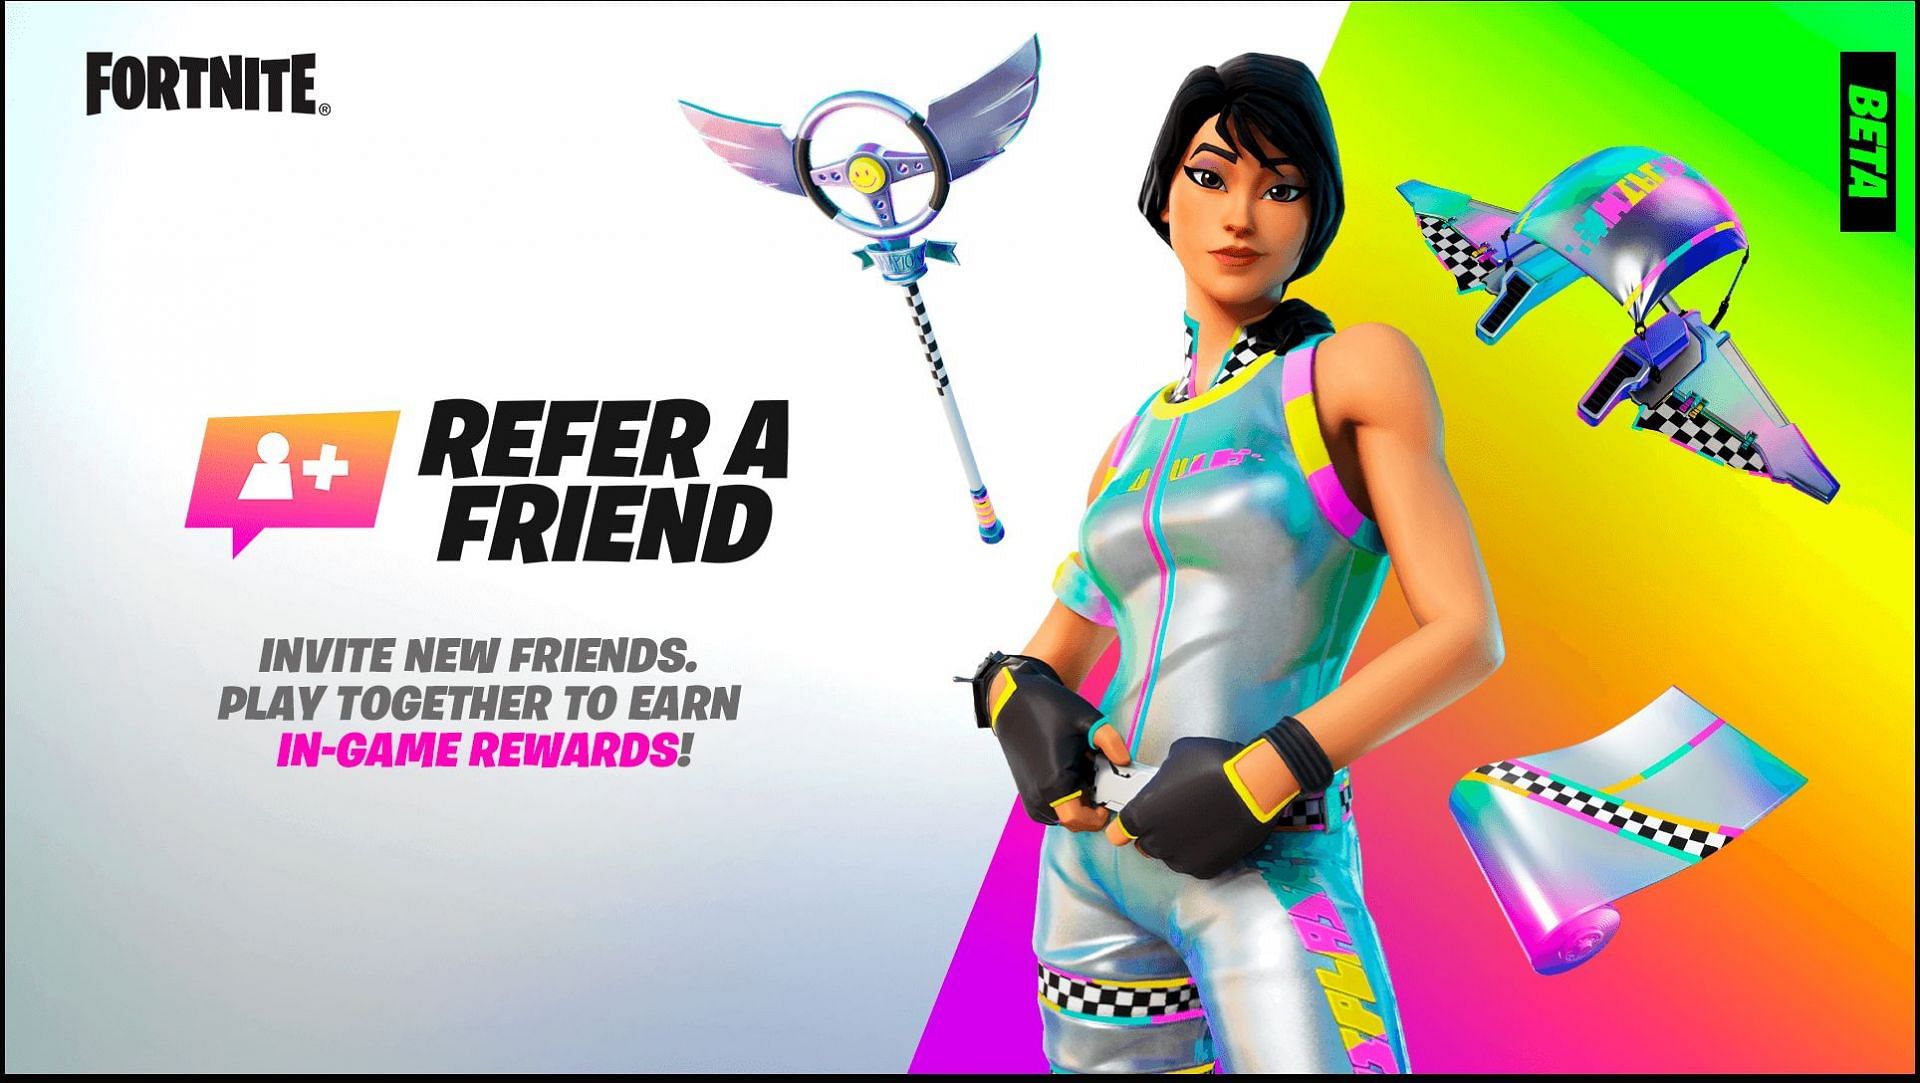 Players can join the Fortnite Refer A Friend program for all the free rewards. Image via Epic Games